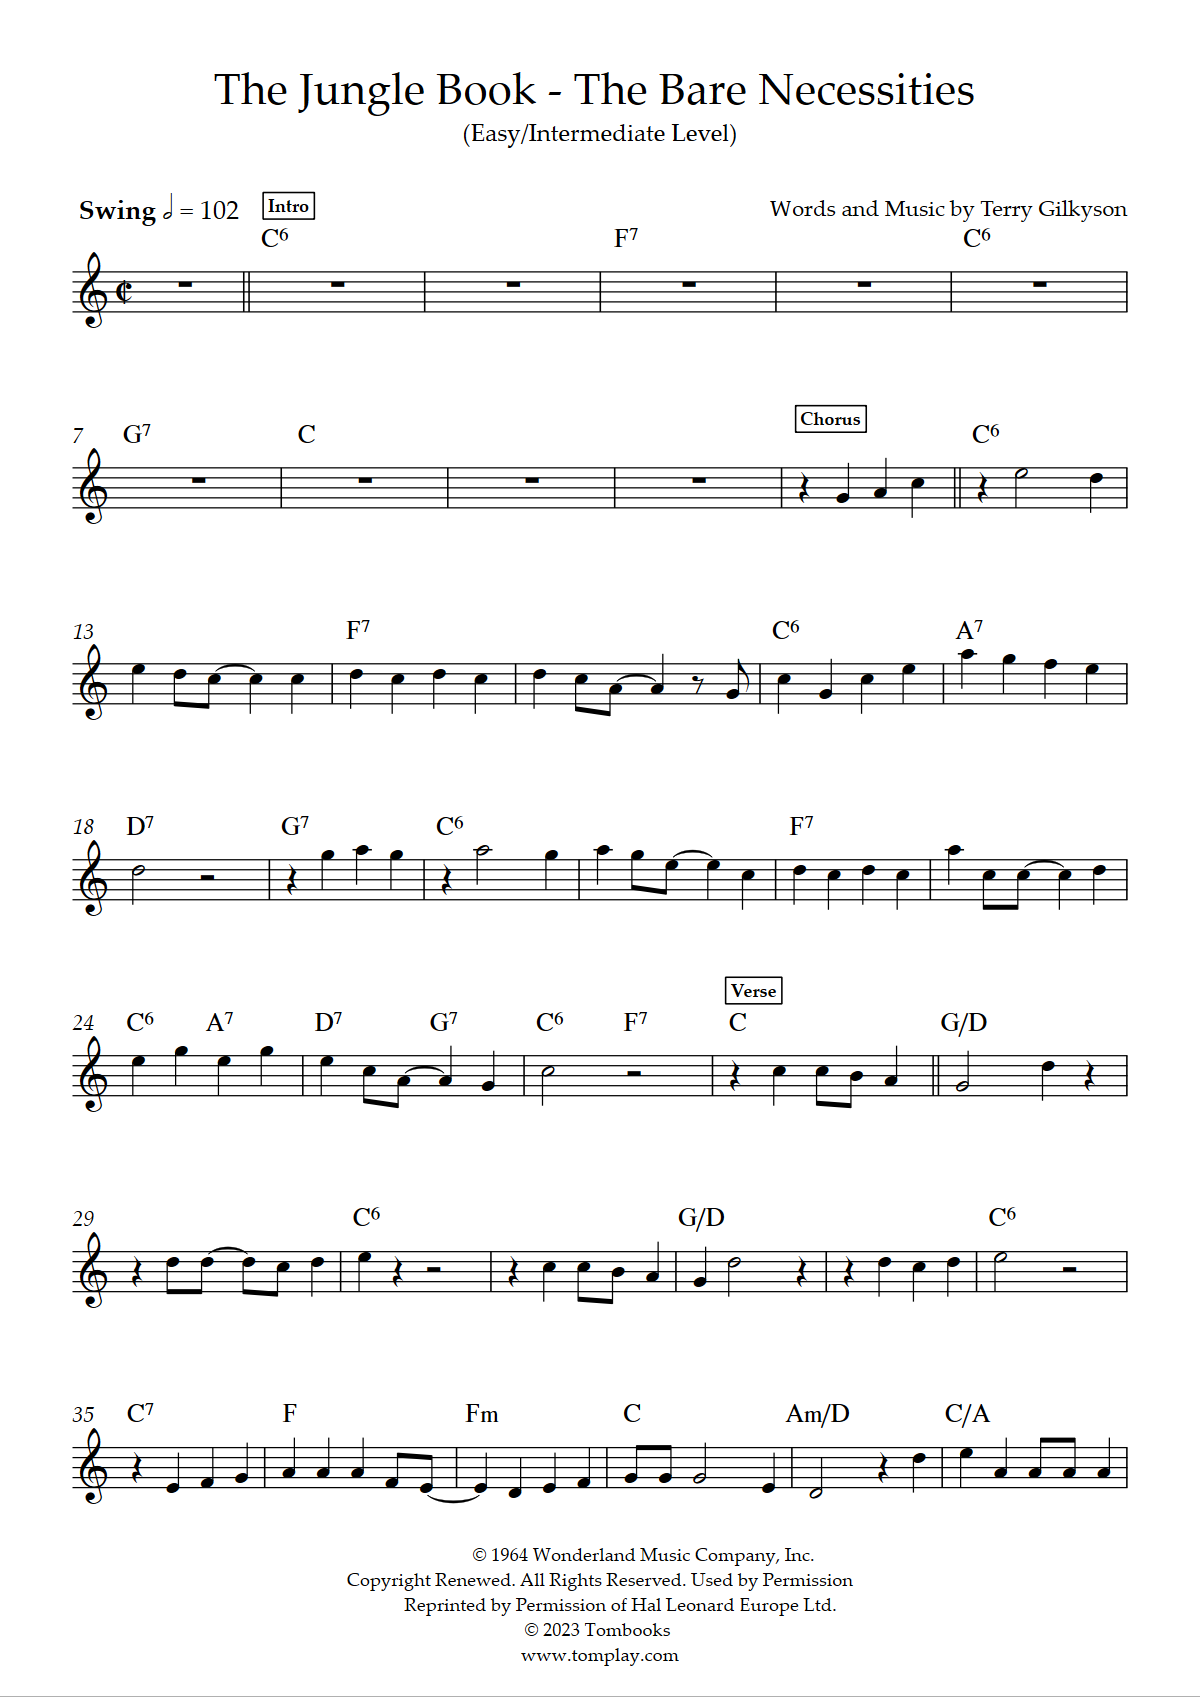 The Bare Necessities Sheet music for Trumpet in b-flat (Solo)